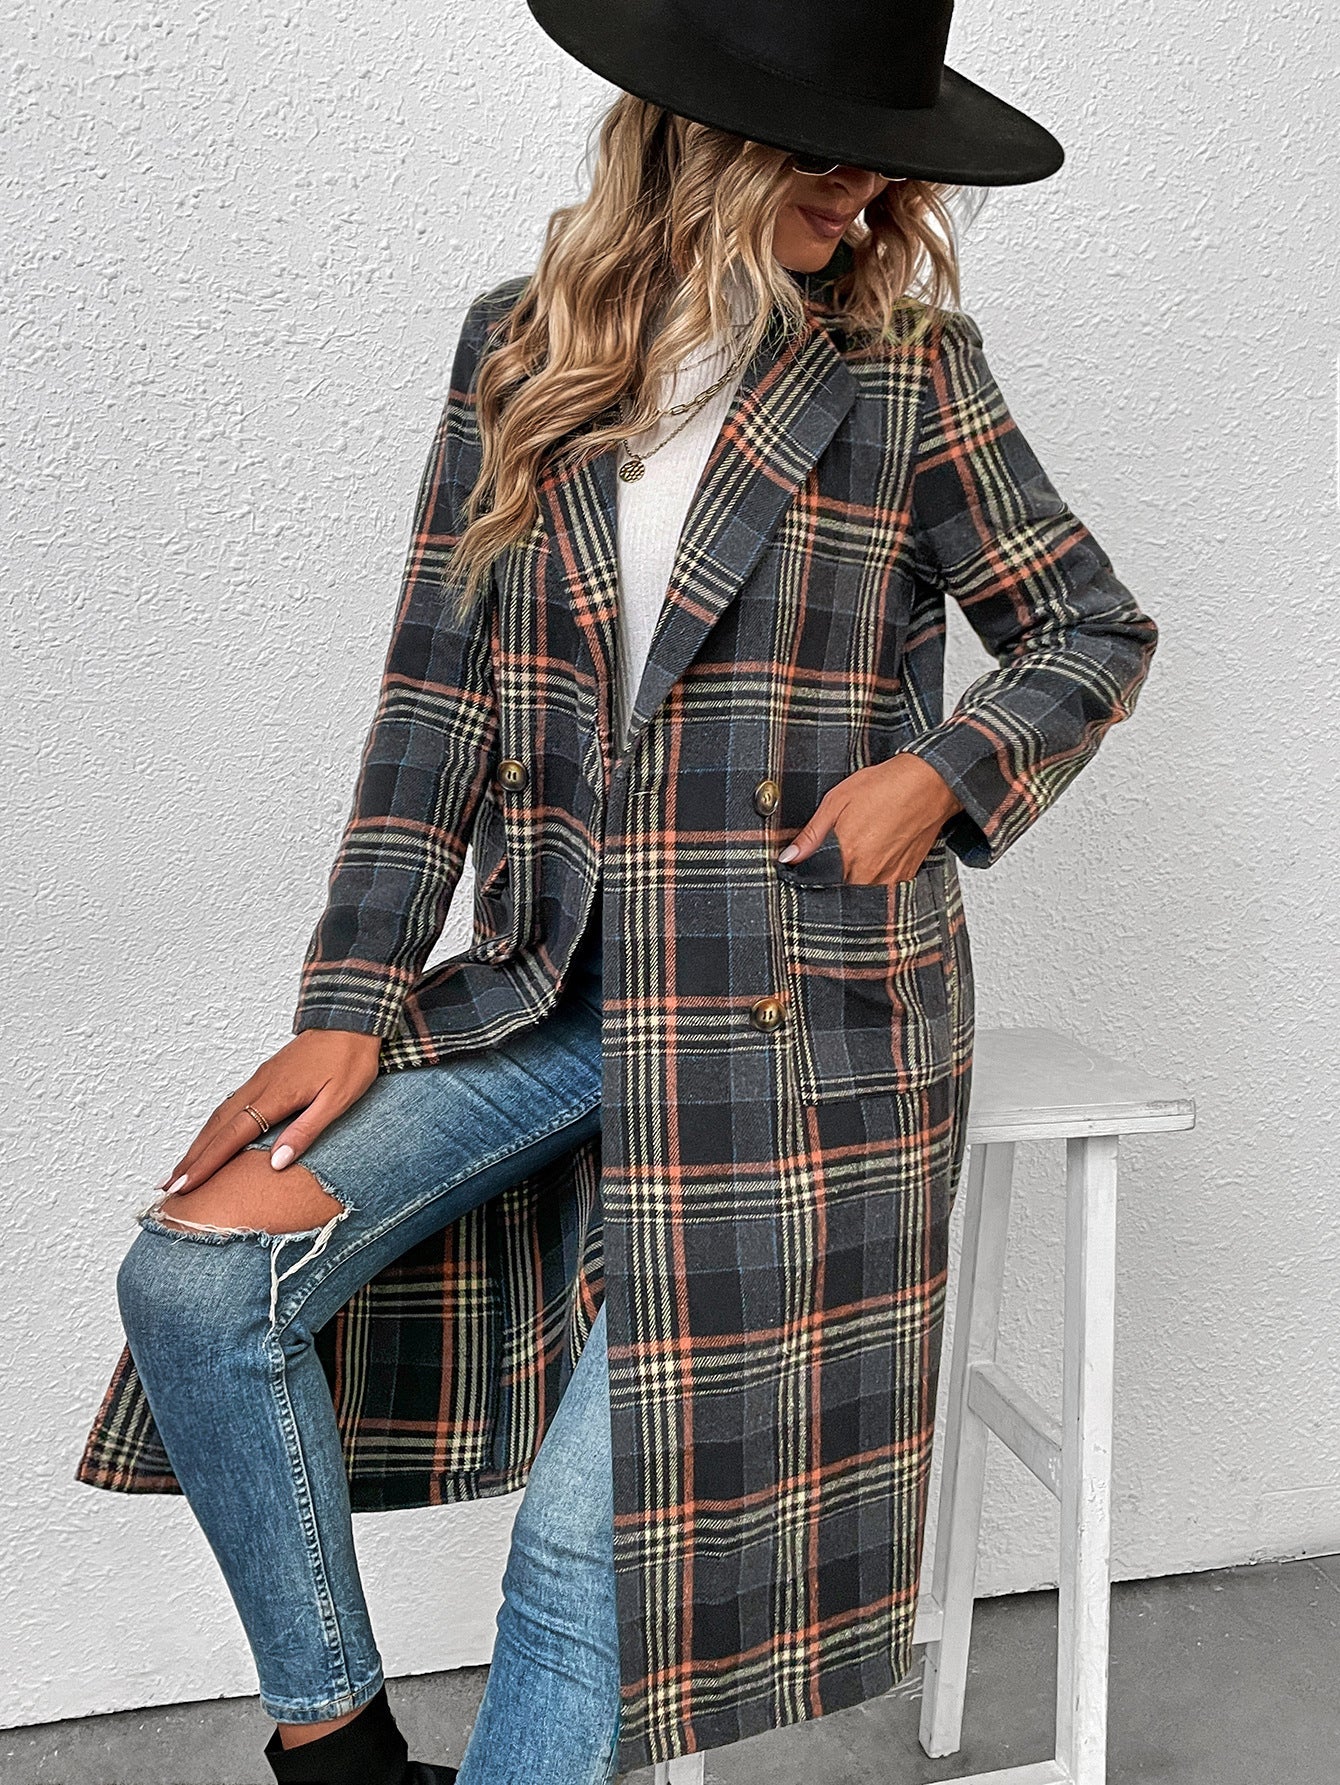 Women's Chic Double Breasted Plaid Wool Coat